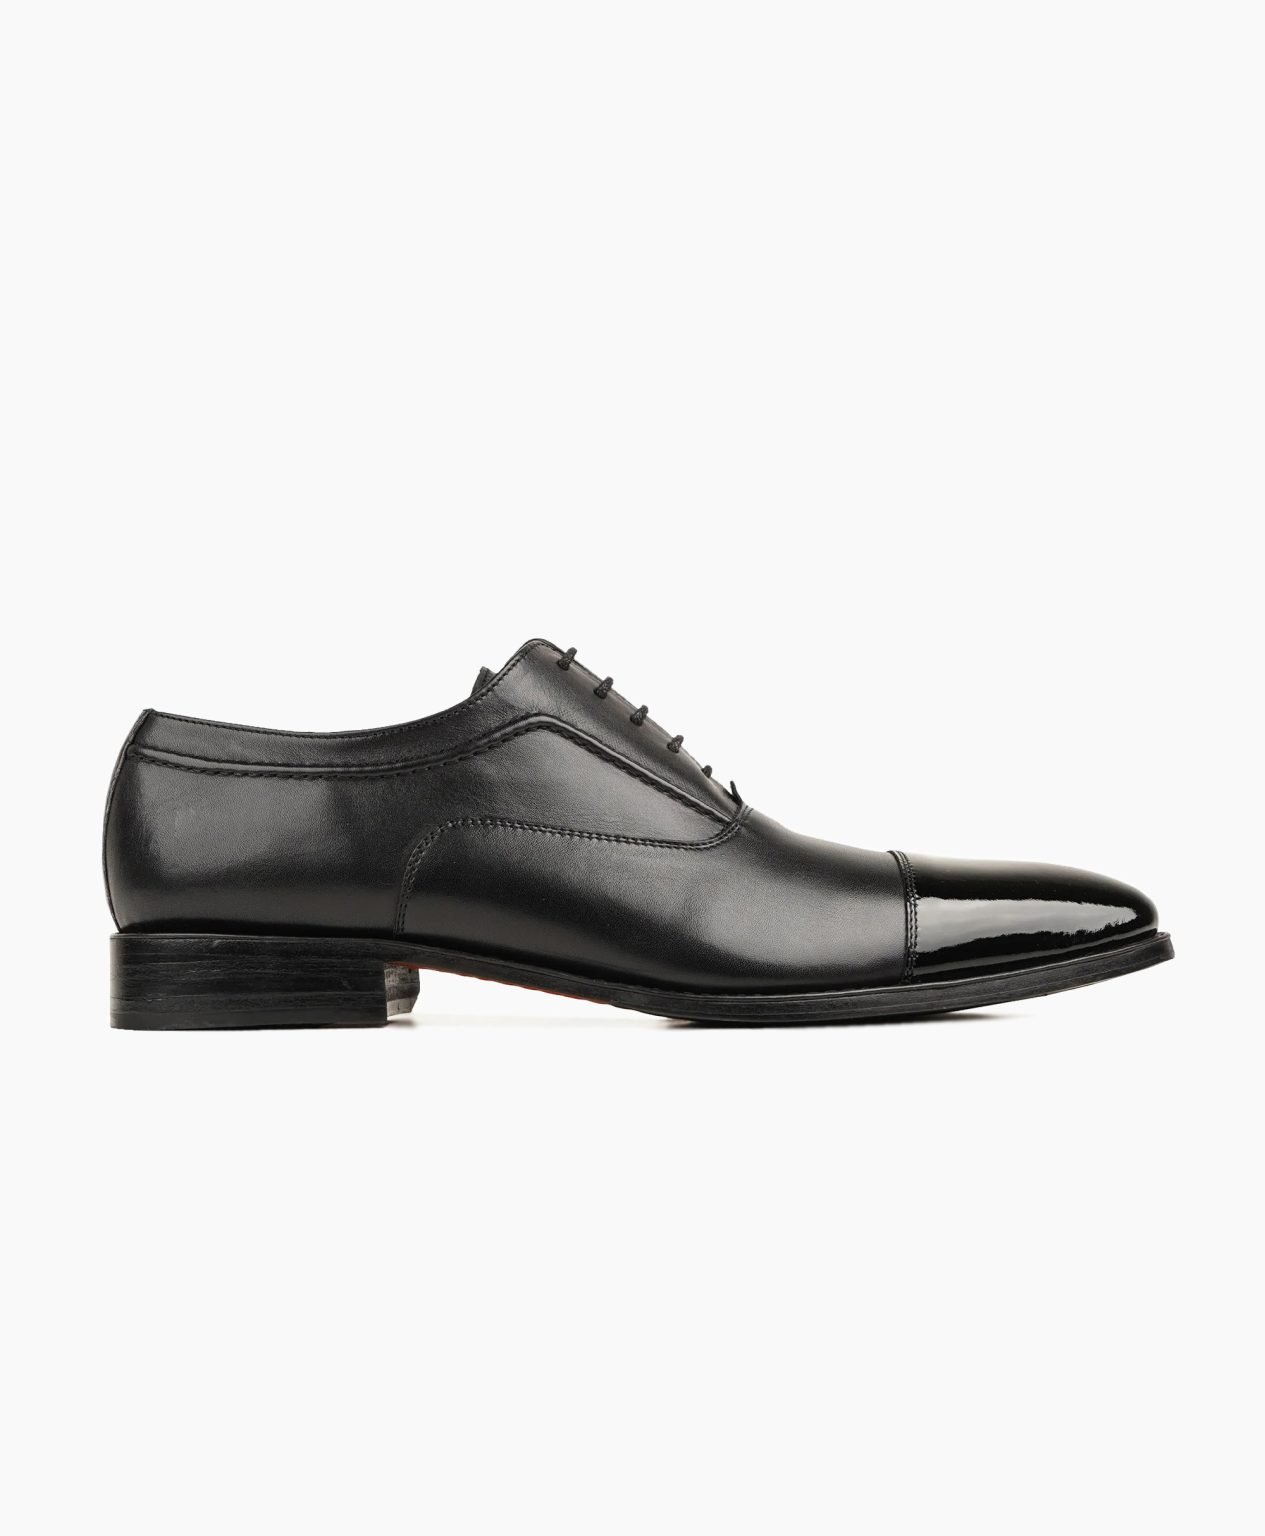 looe-oxford-black-with-patent-toe-cap-leather-shoes-image201